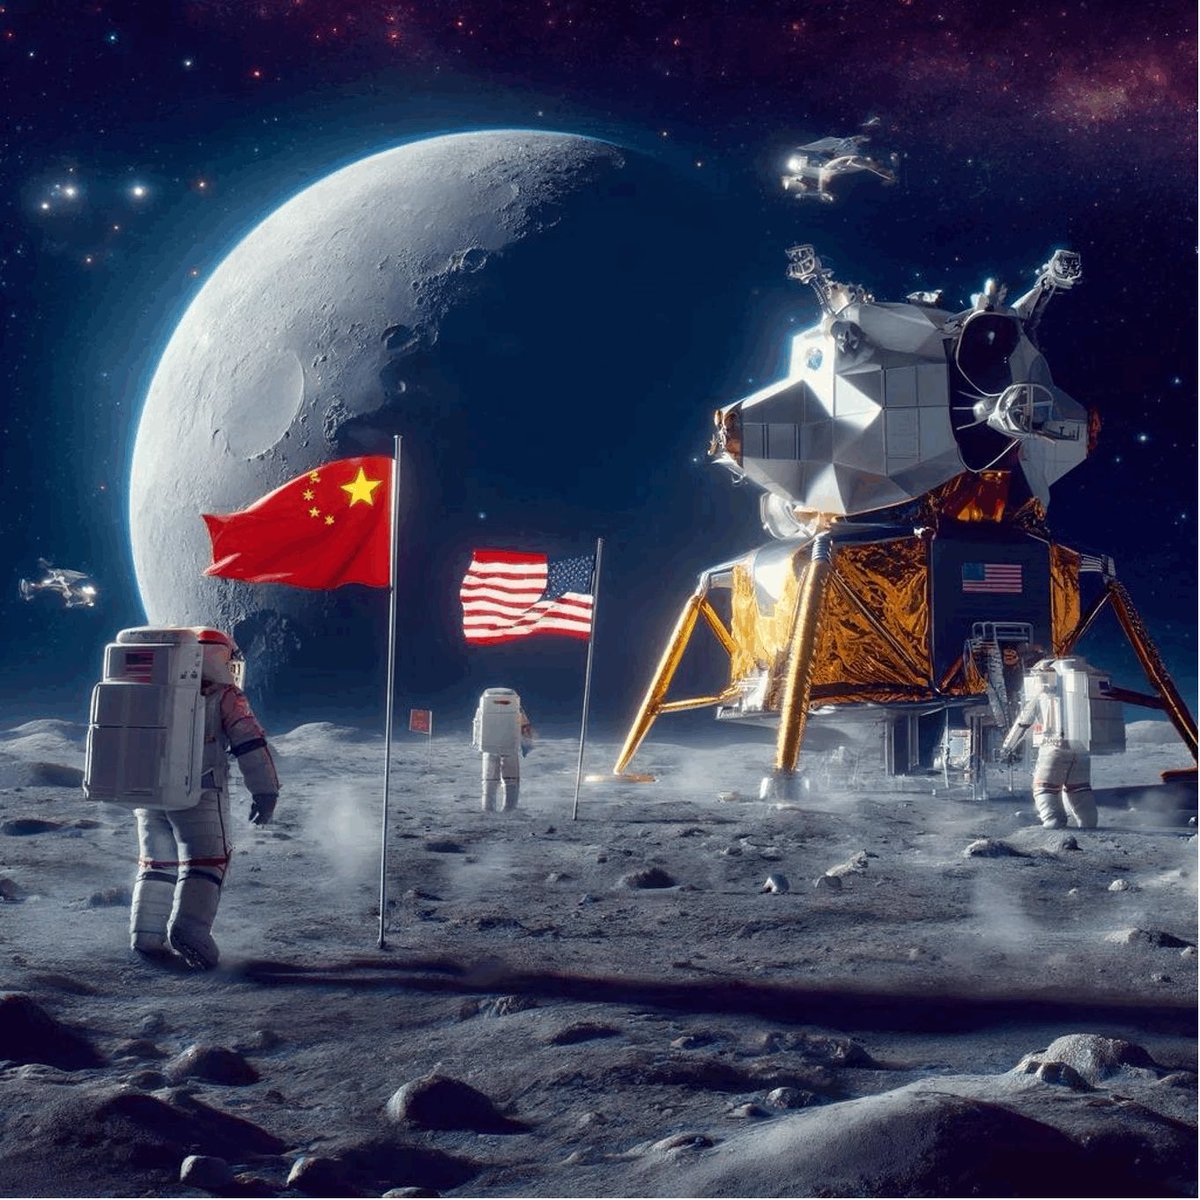 China has launched a space mission to collect samples from the back of the Moon, @WSJ reports. This will be a key moment in the rivalry between #China and the United States for control of the Moon's south pole, which contains significant ice reserves. #NASA fears that if Beijing…